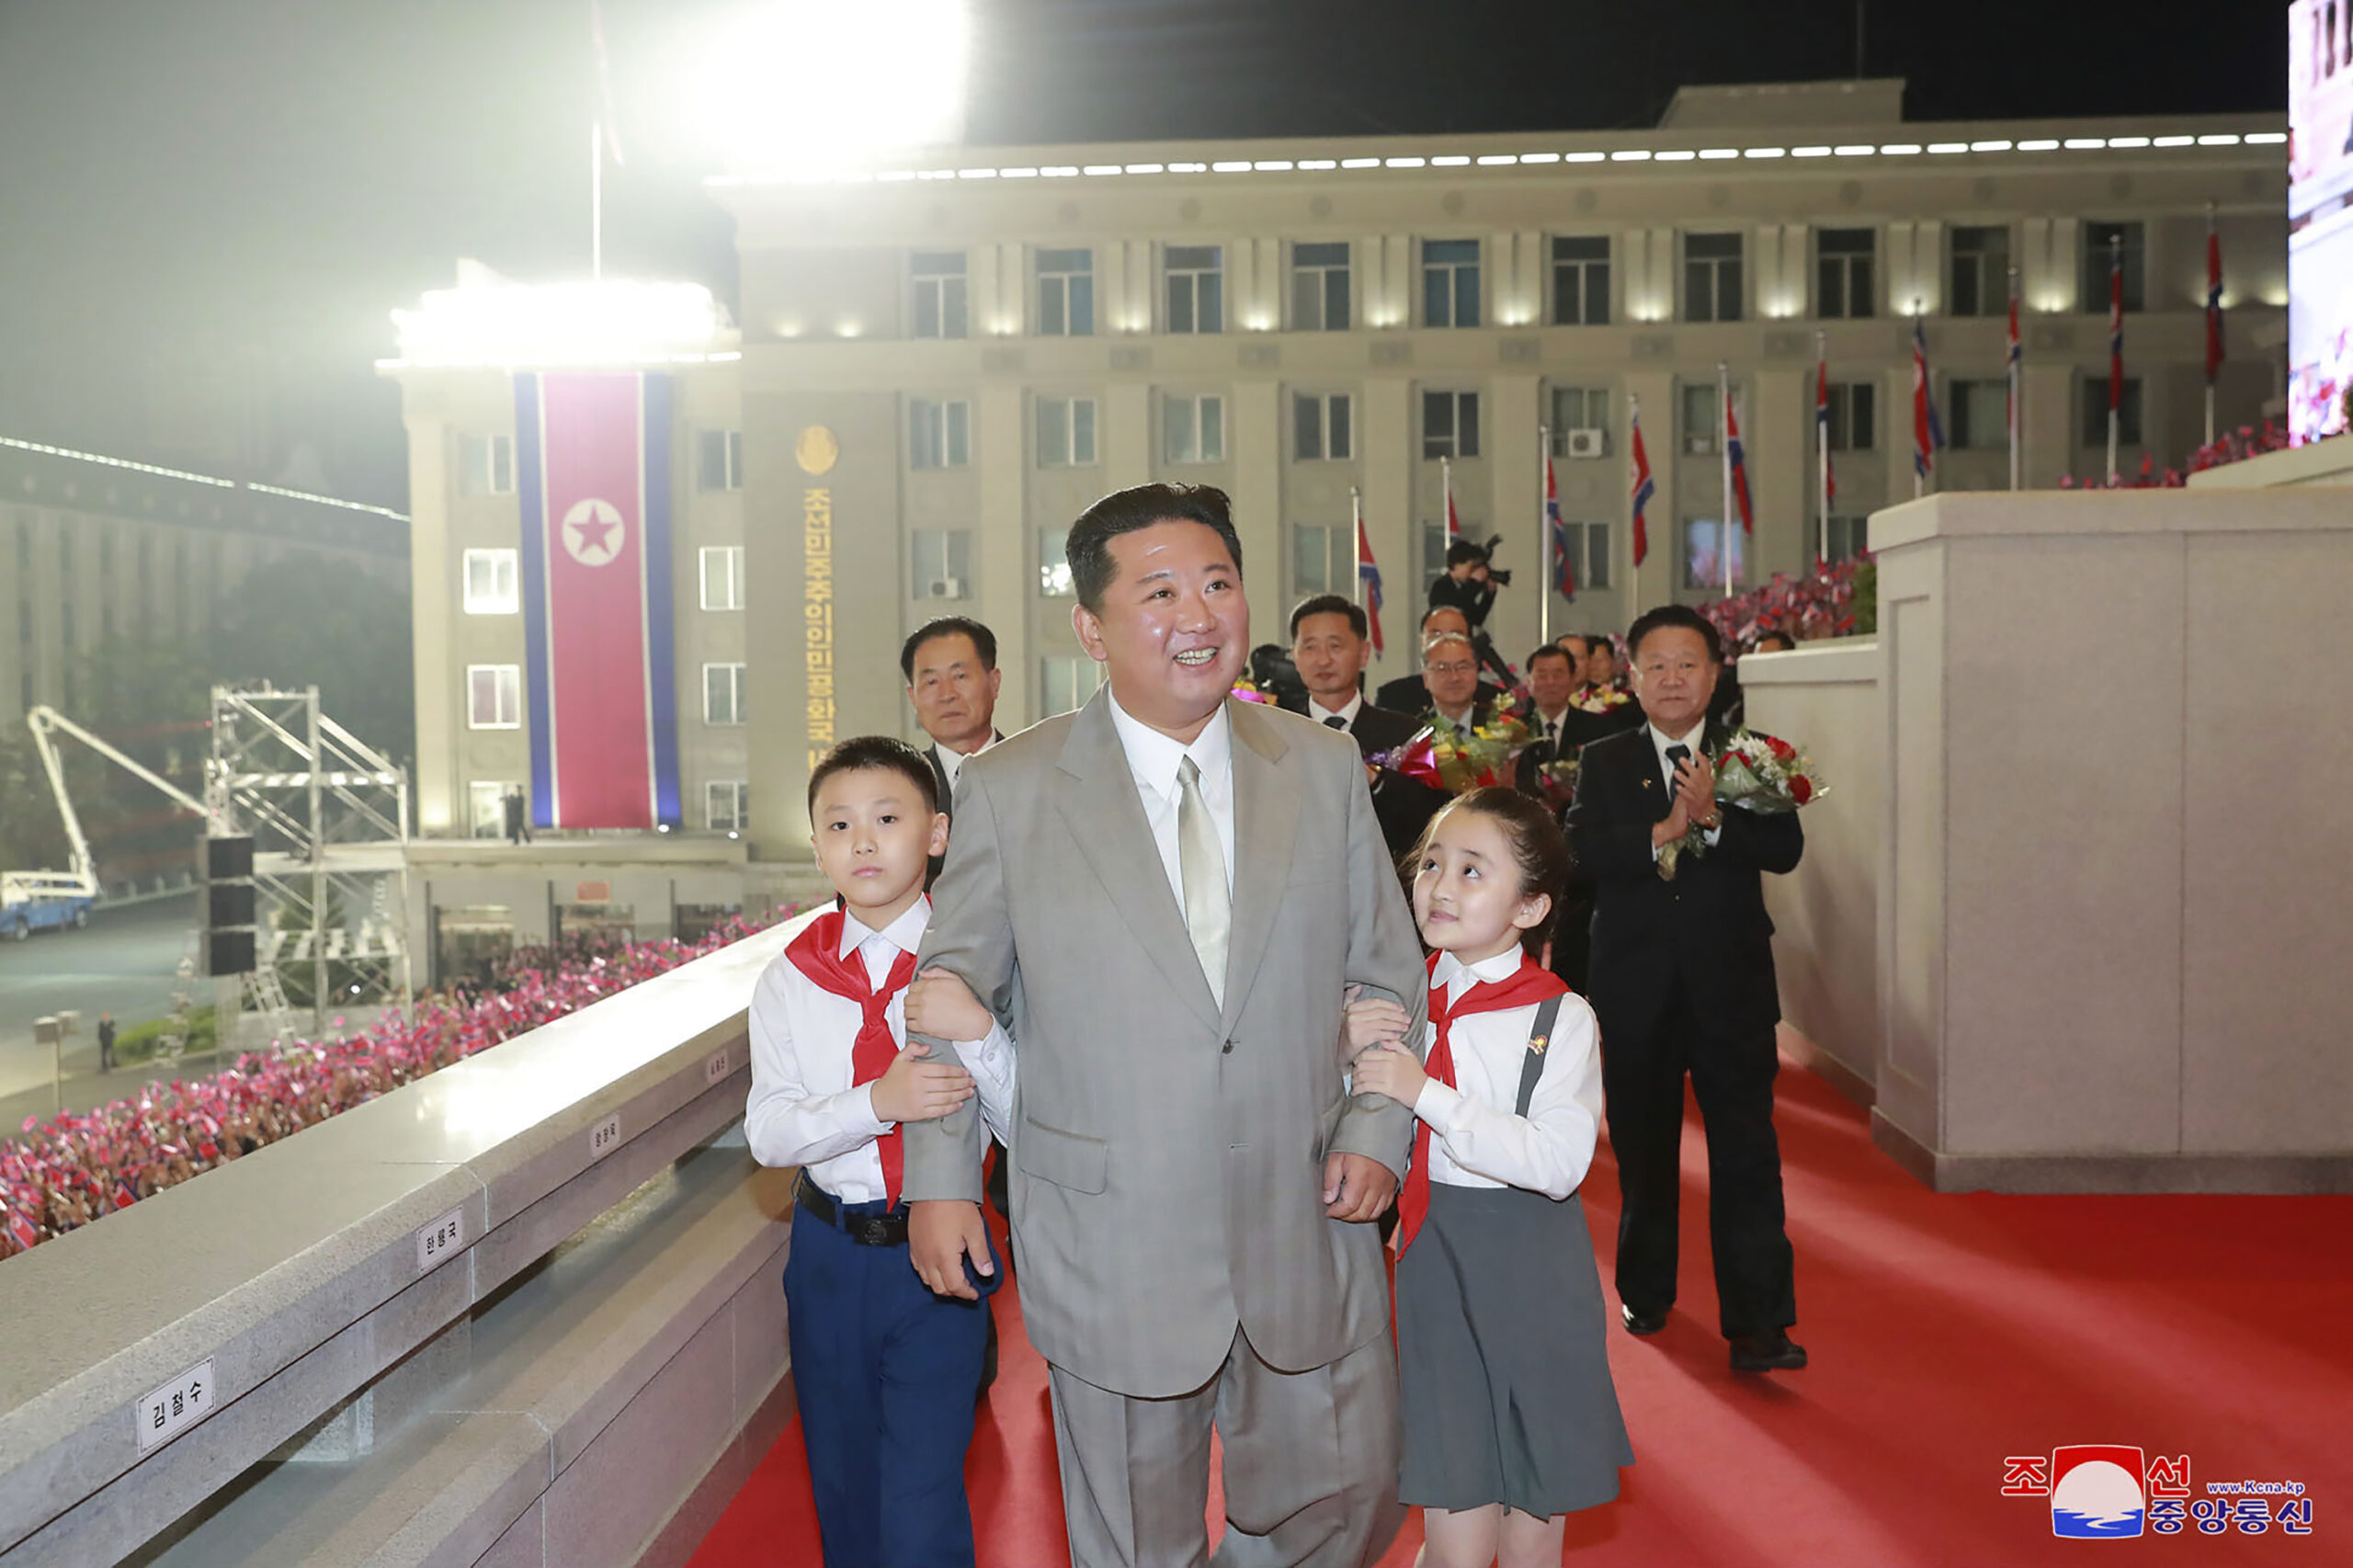 North Korea Celebrated 73rd Anniversary With Large-Scale Night Parade (Photos)